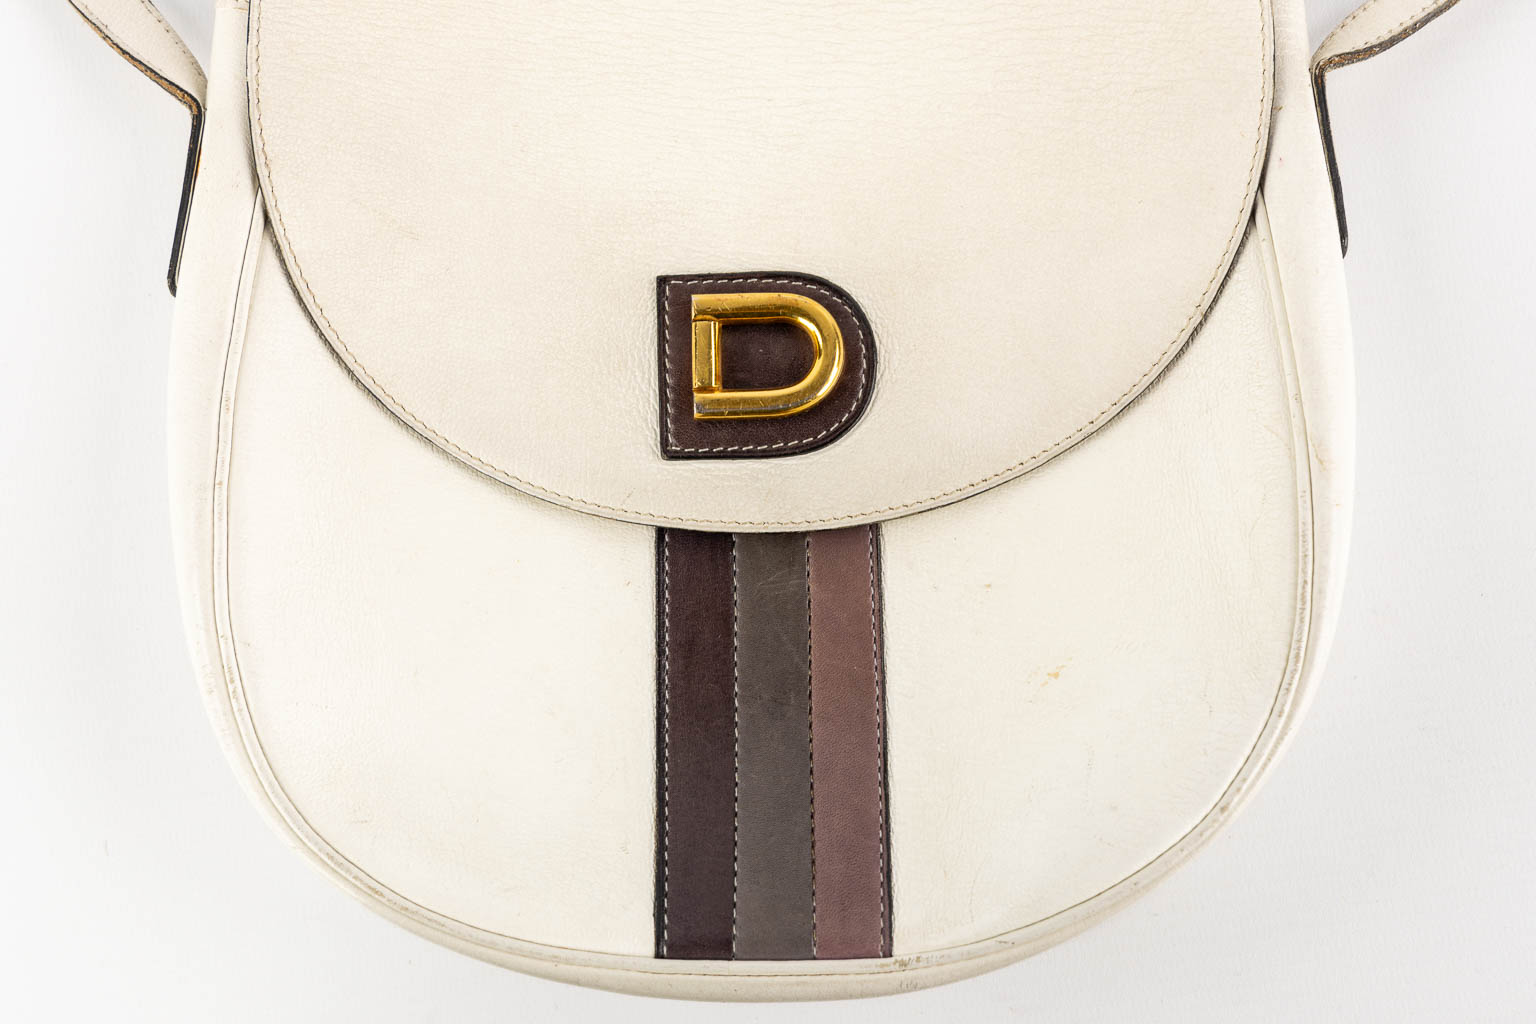 Delvaux, two handbags, a wallet and pen holder. (W:30 x H:25 cm) - Image 18 of 20